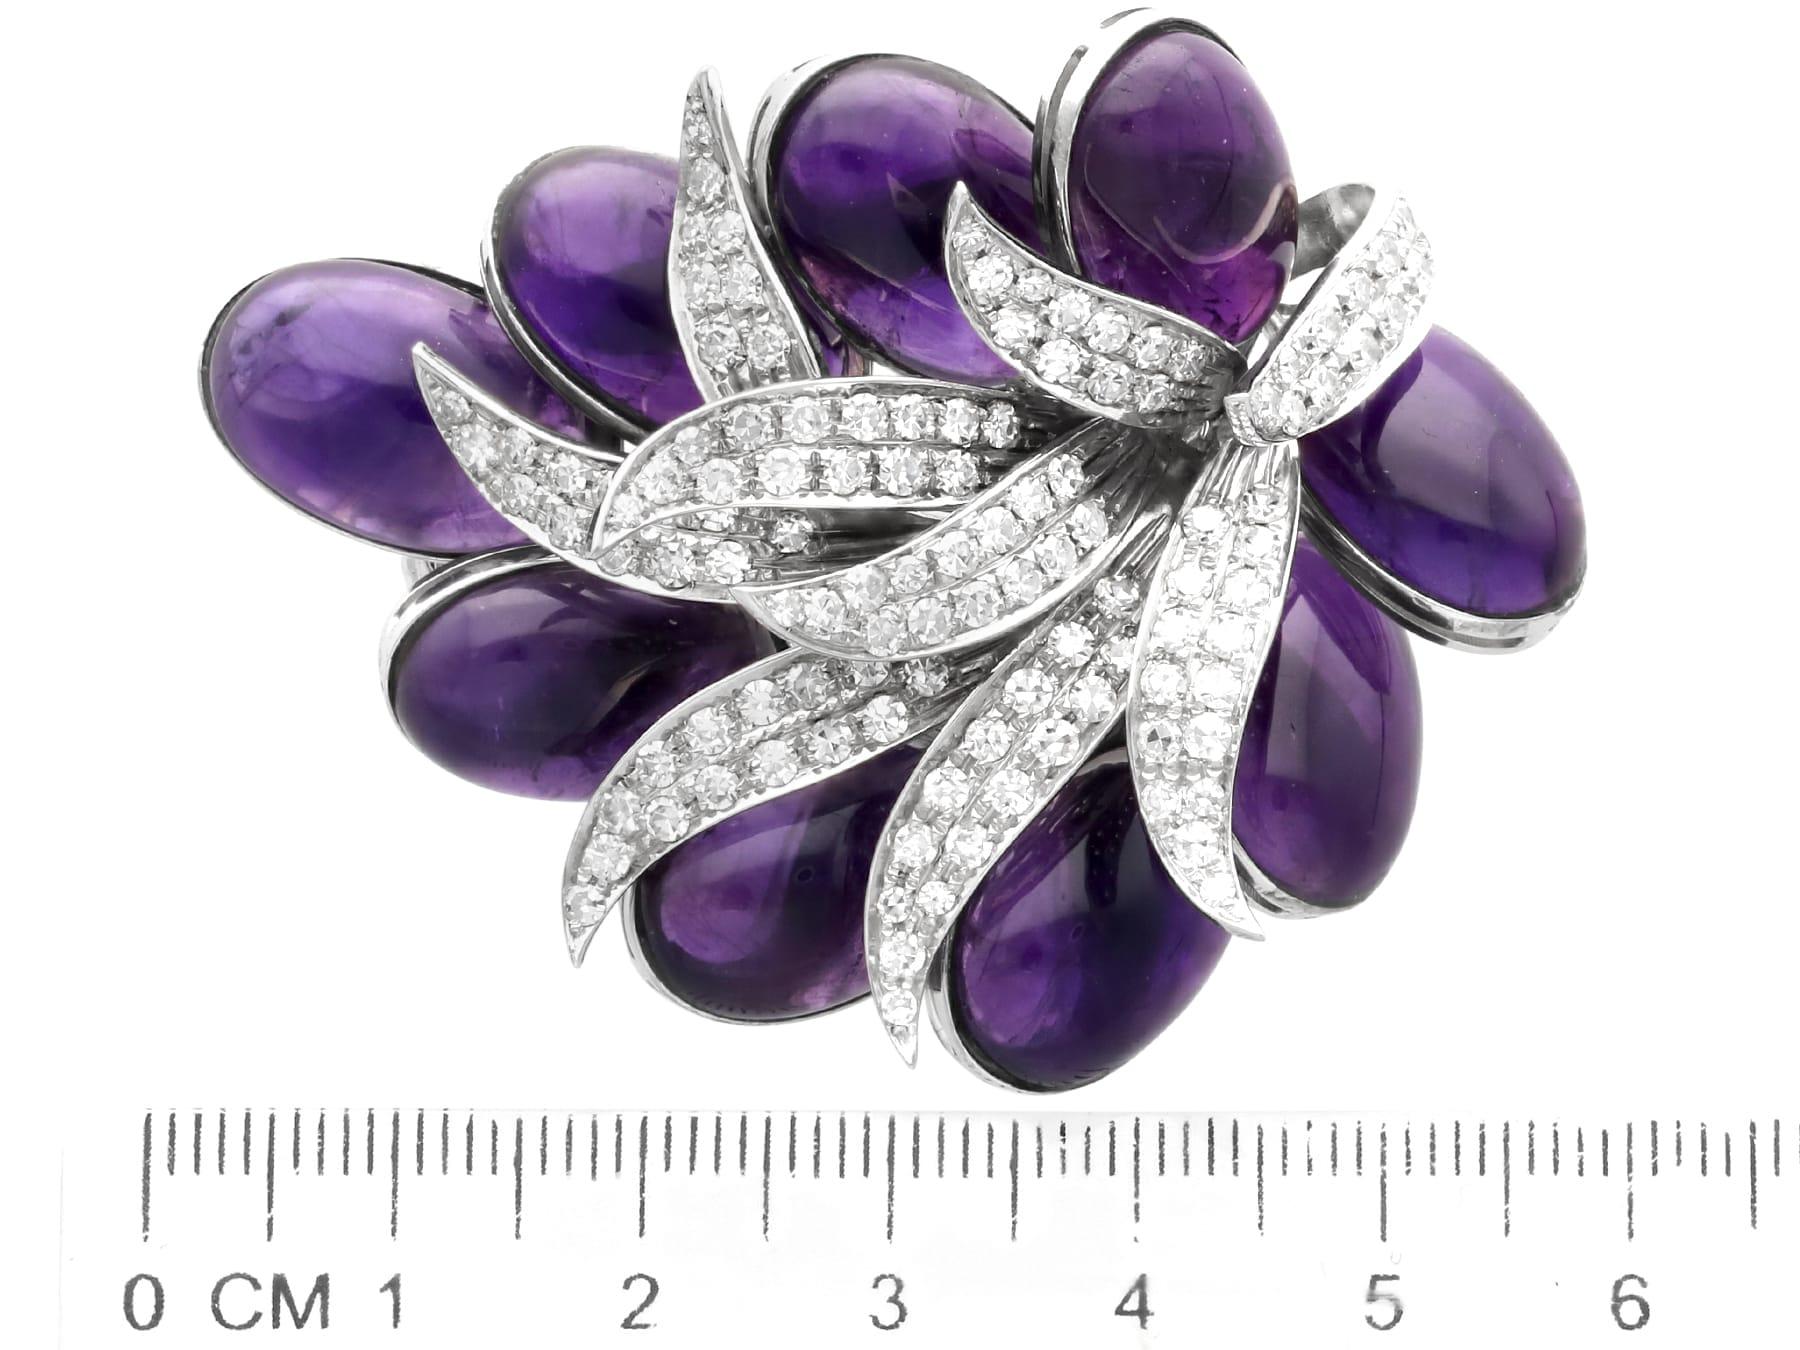 Vintage 55Ct Amethyst and 3.02Ct Diamond 18k White Gold Brooch Circa 1950 For Sale 2